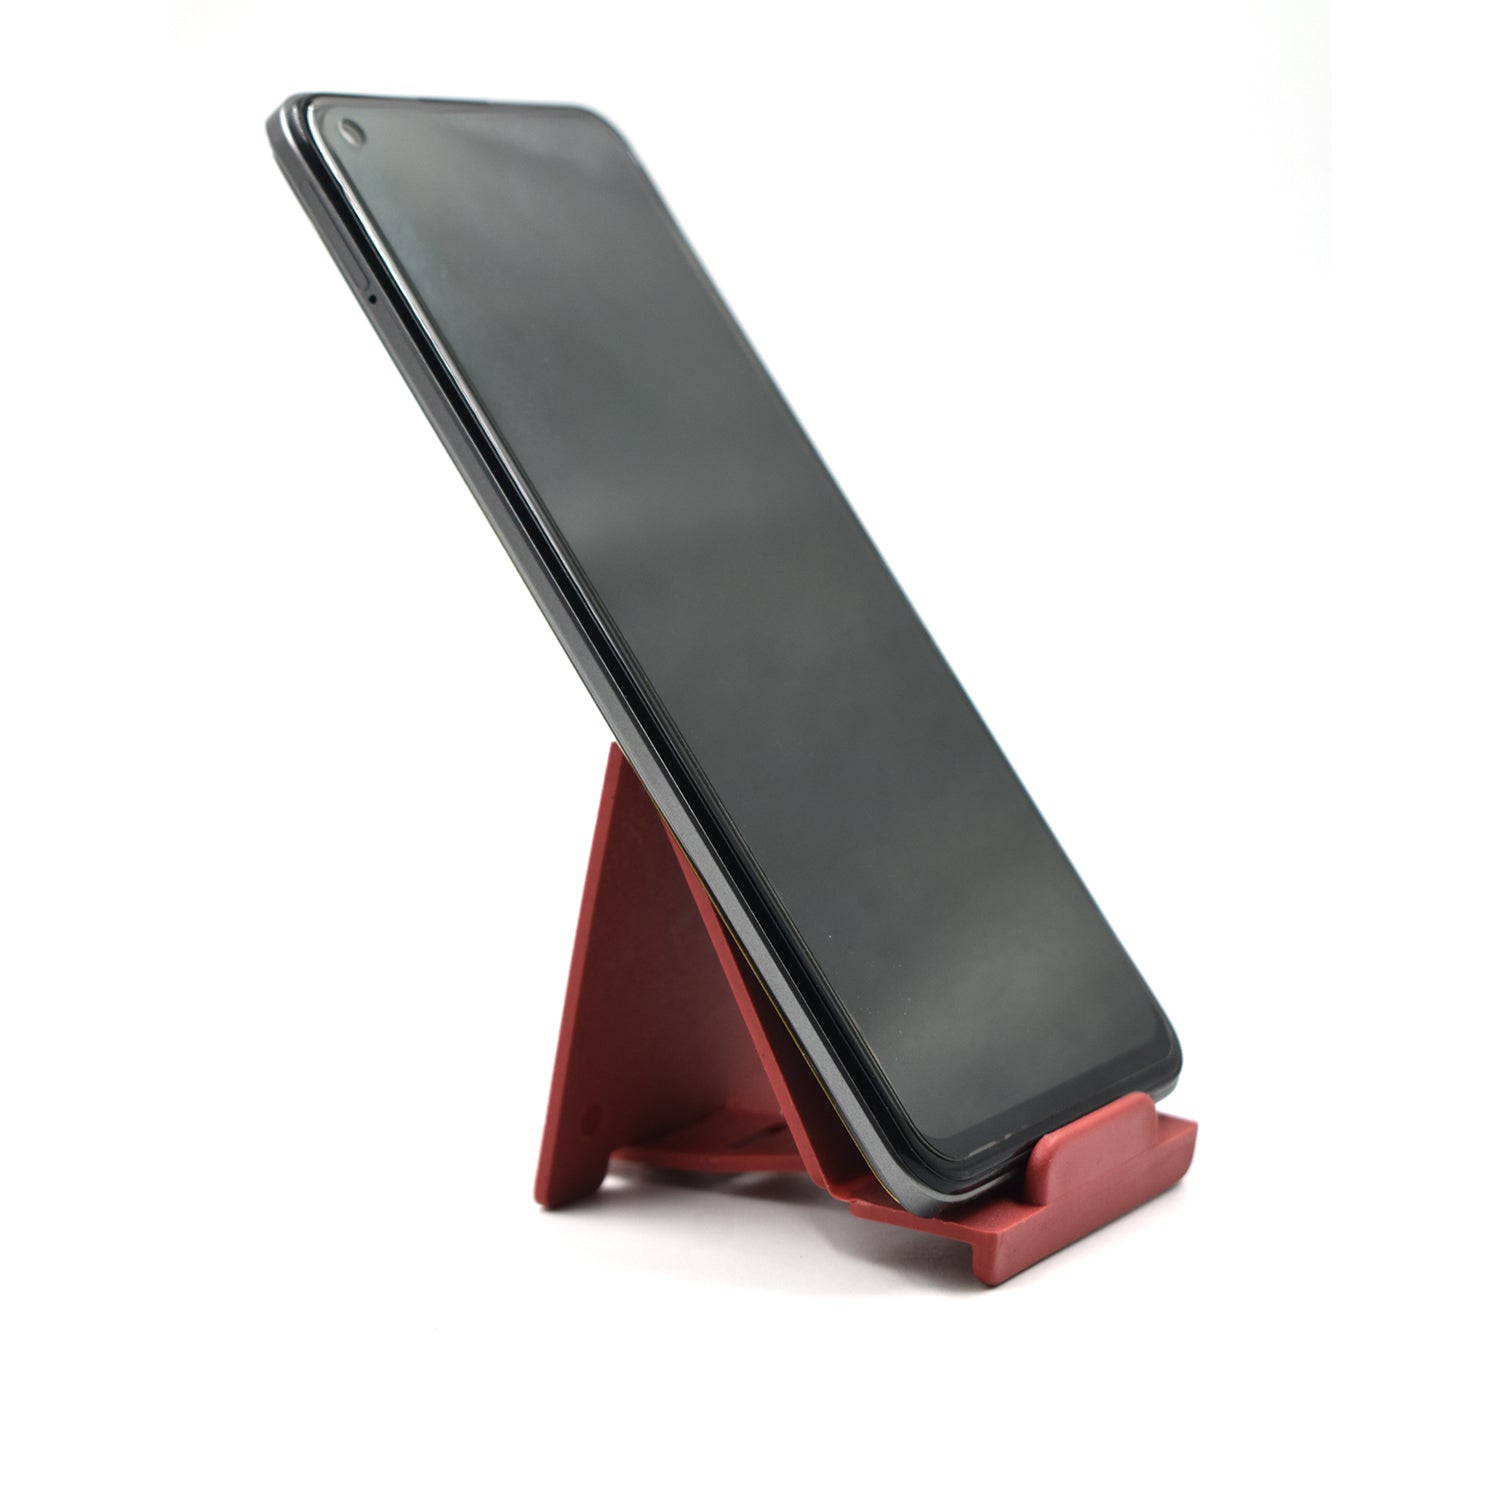 4793 10 Pc Adjustable Mobile Stand used in all kinds of places including household and offices as a mobile supporting stand.